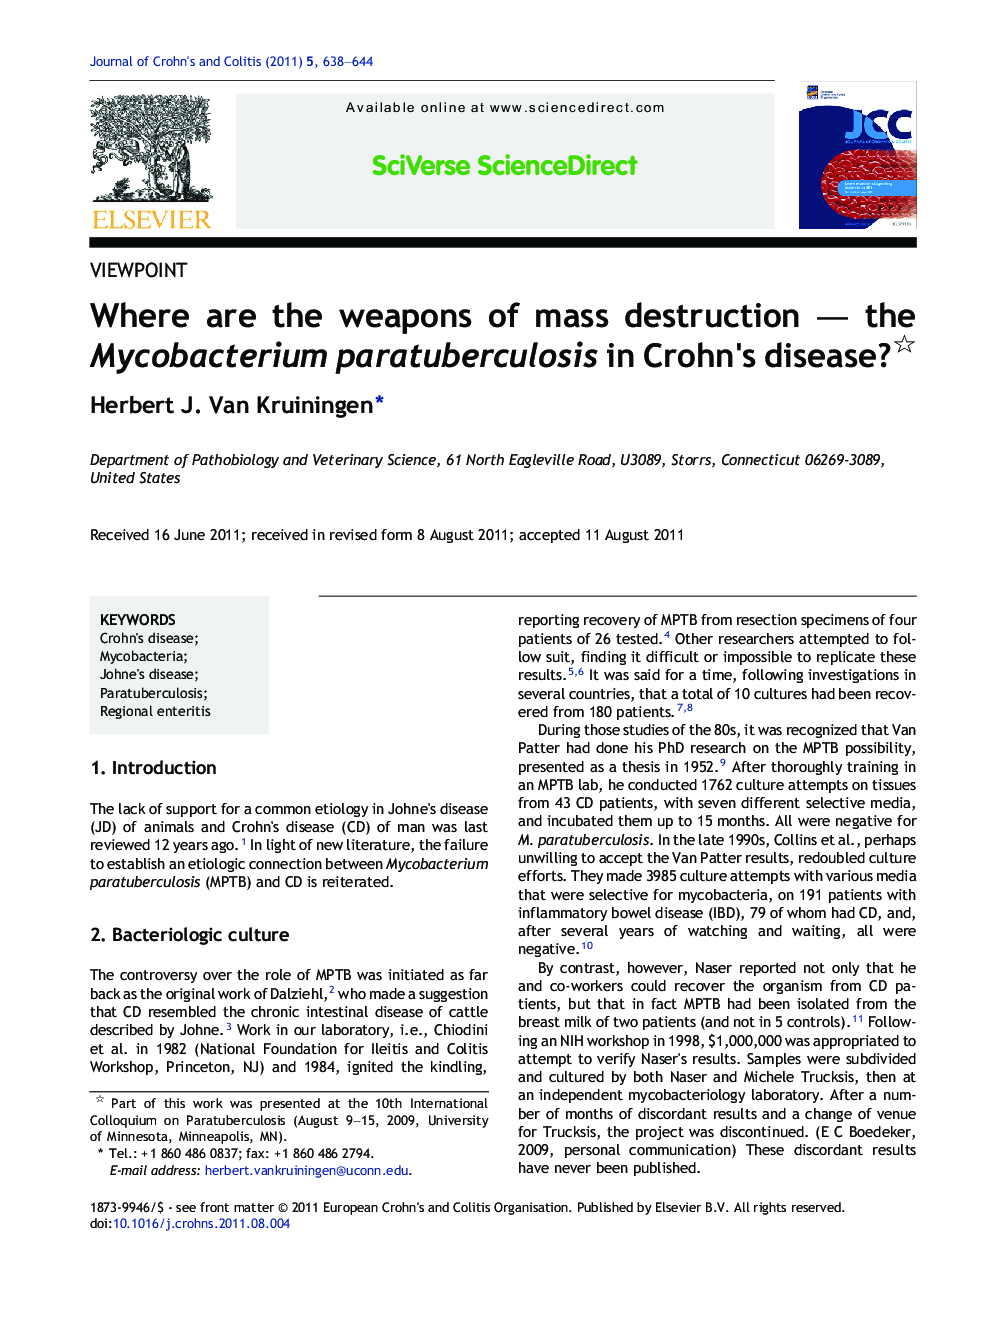 Where are the weapons of mass destruction - the Mycobacterium paratuberculosis in Crohn's disease?